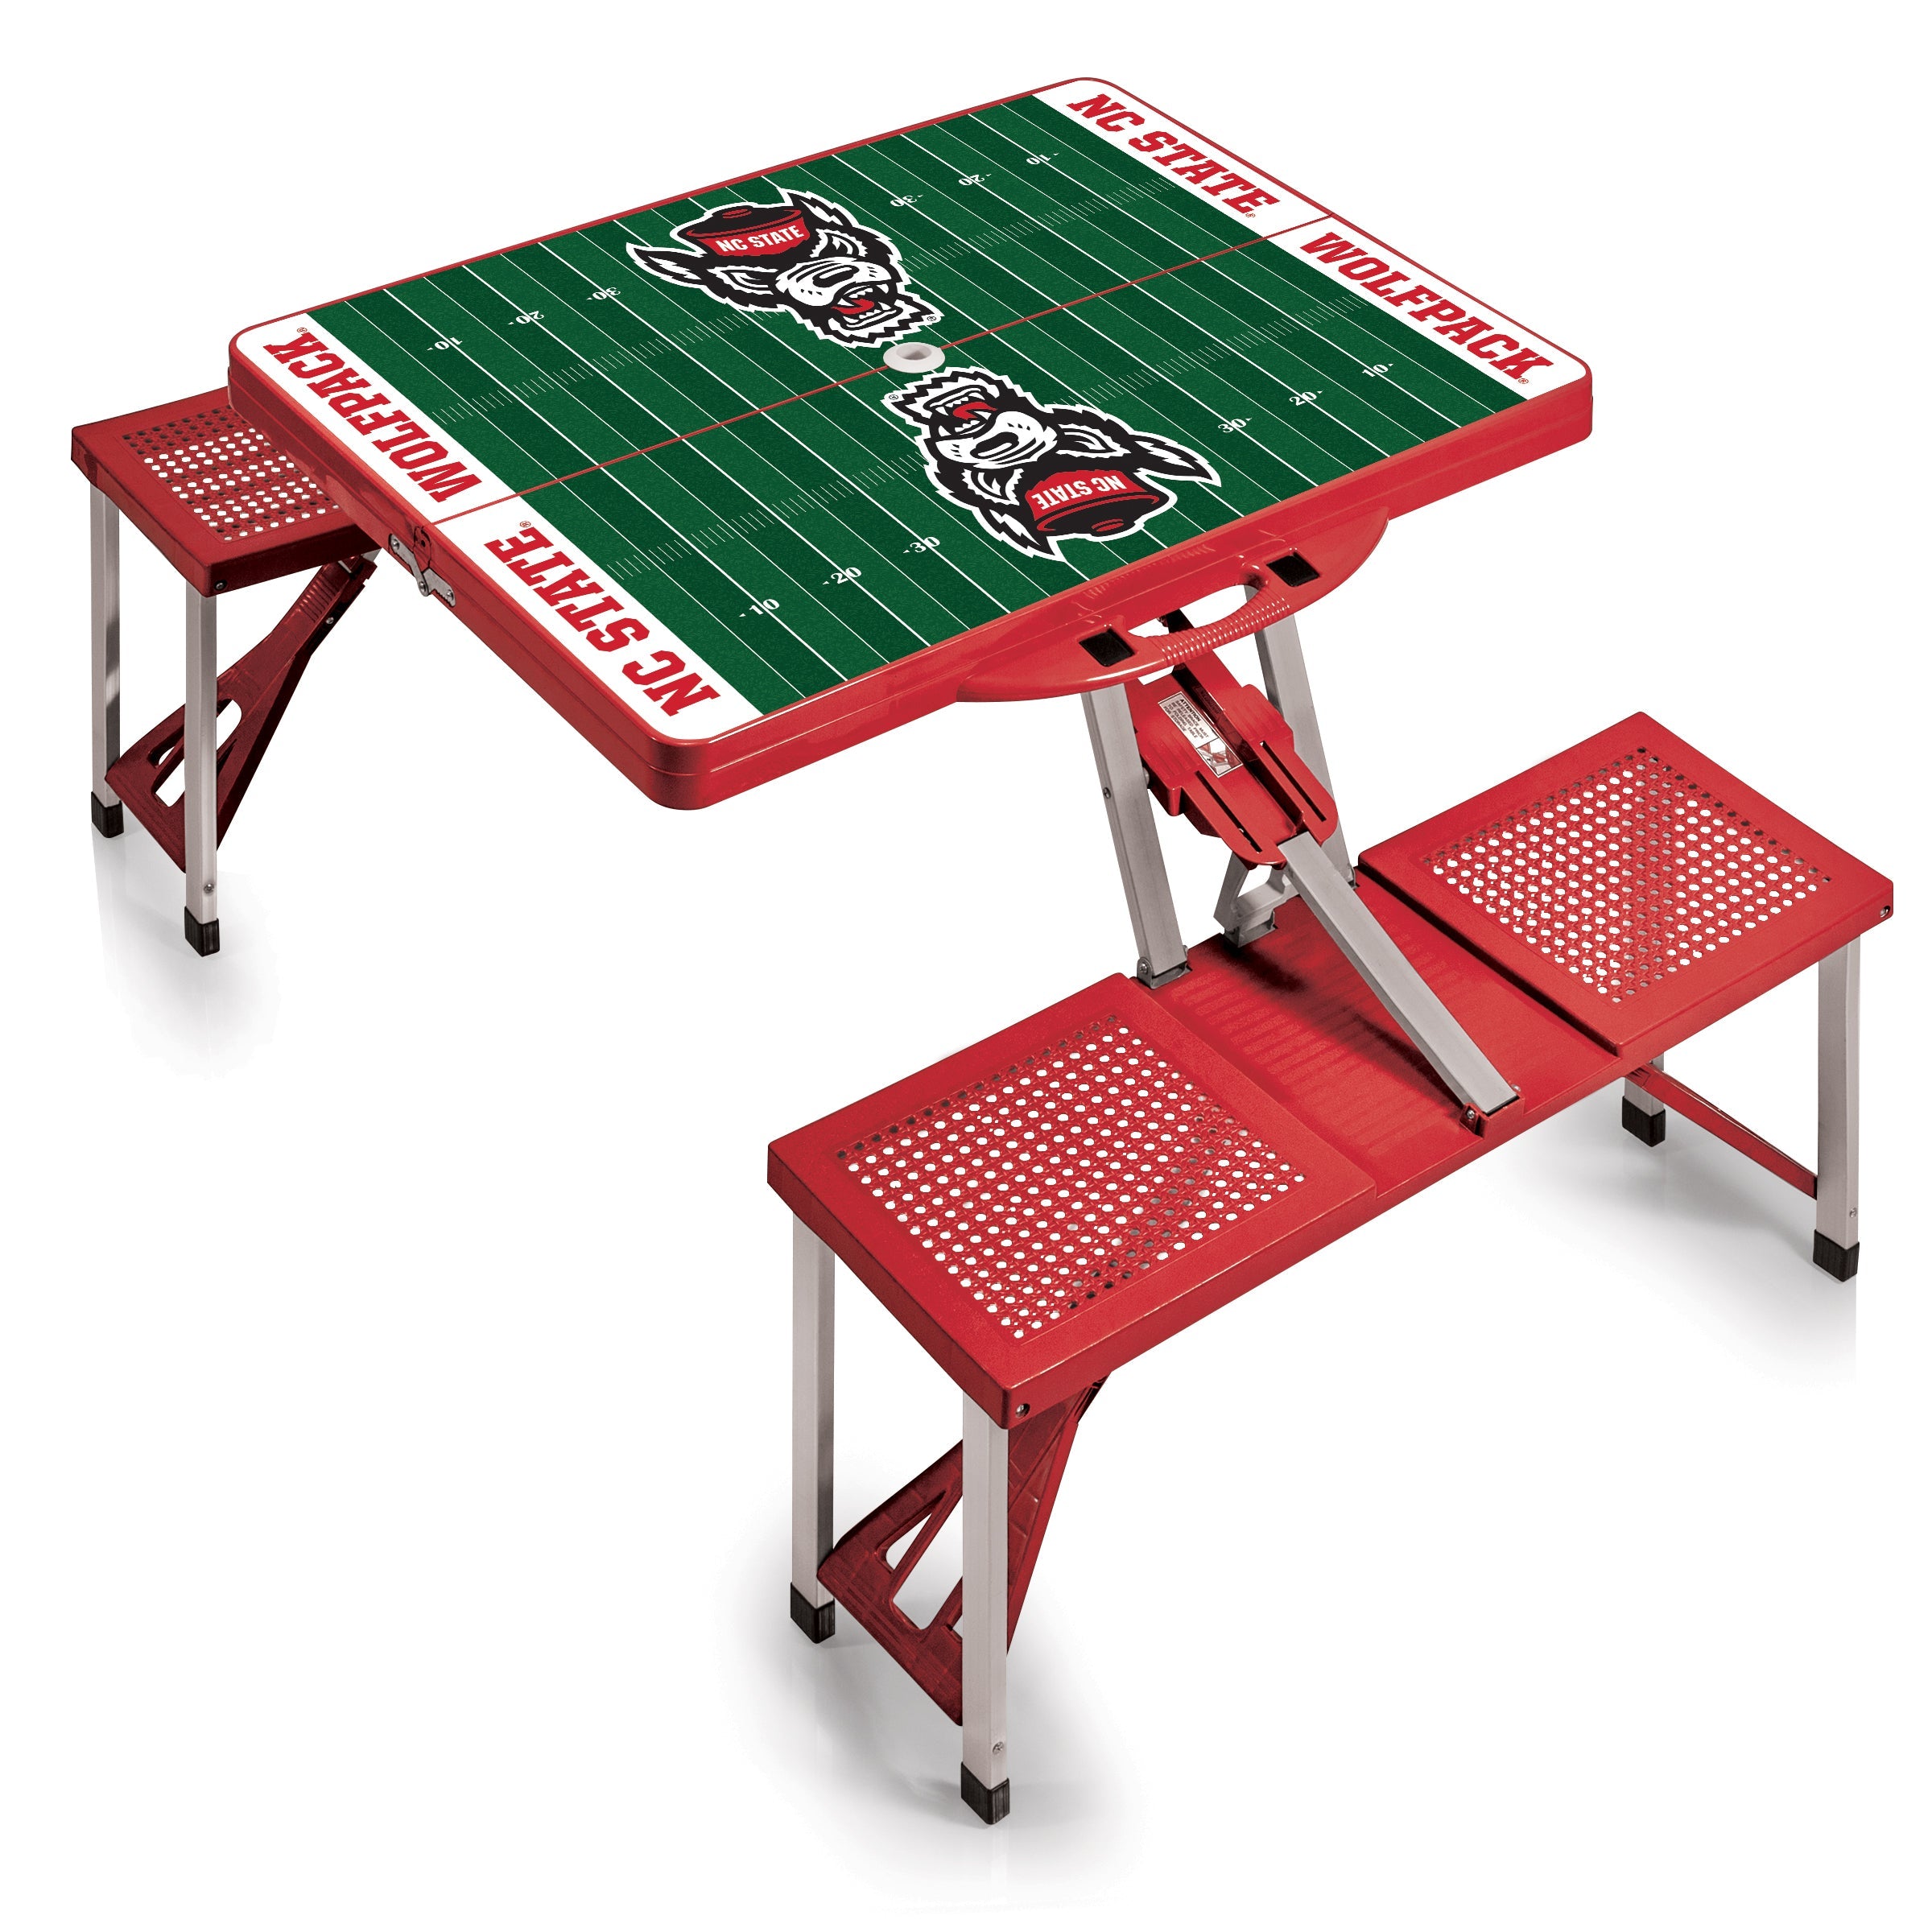 Football Field - NC State Wolfpack - Picnic Table Portable Folding Table with Seats